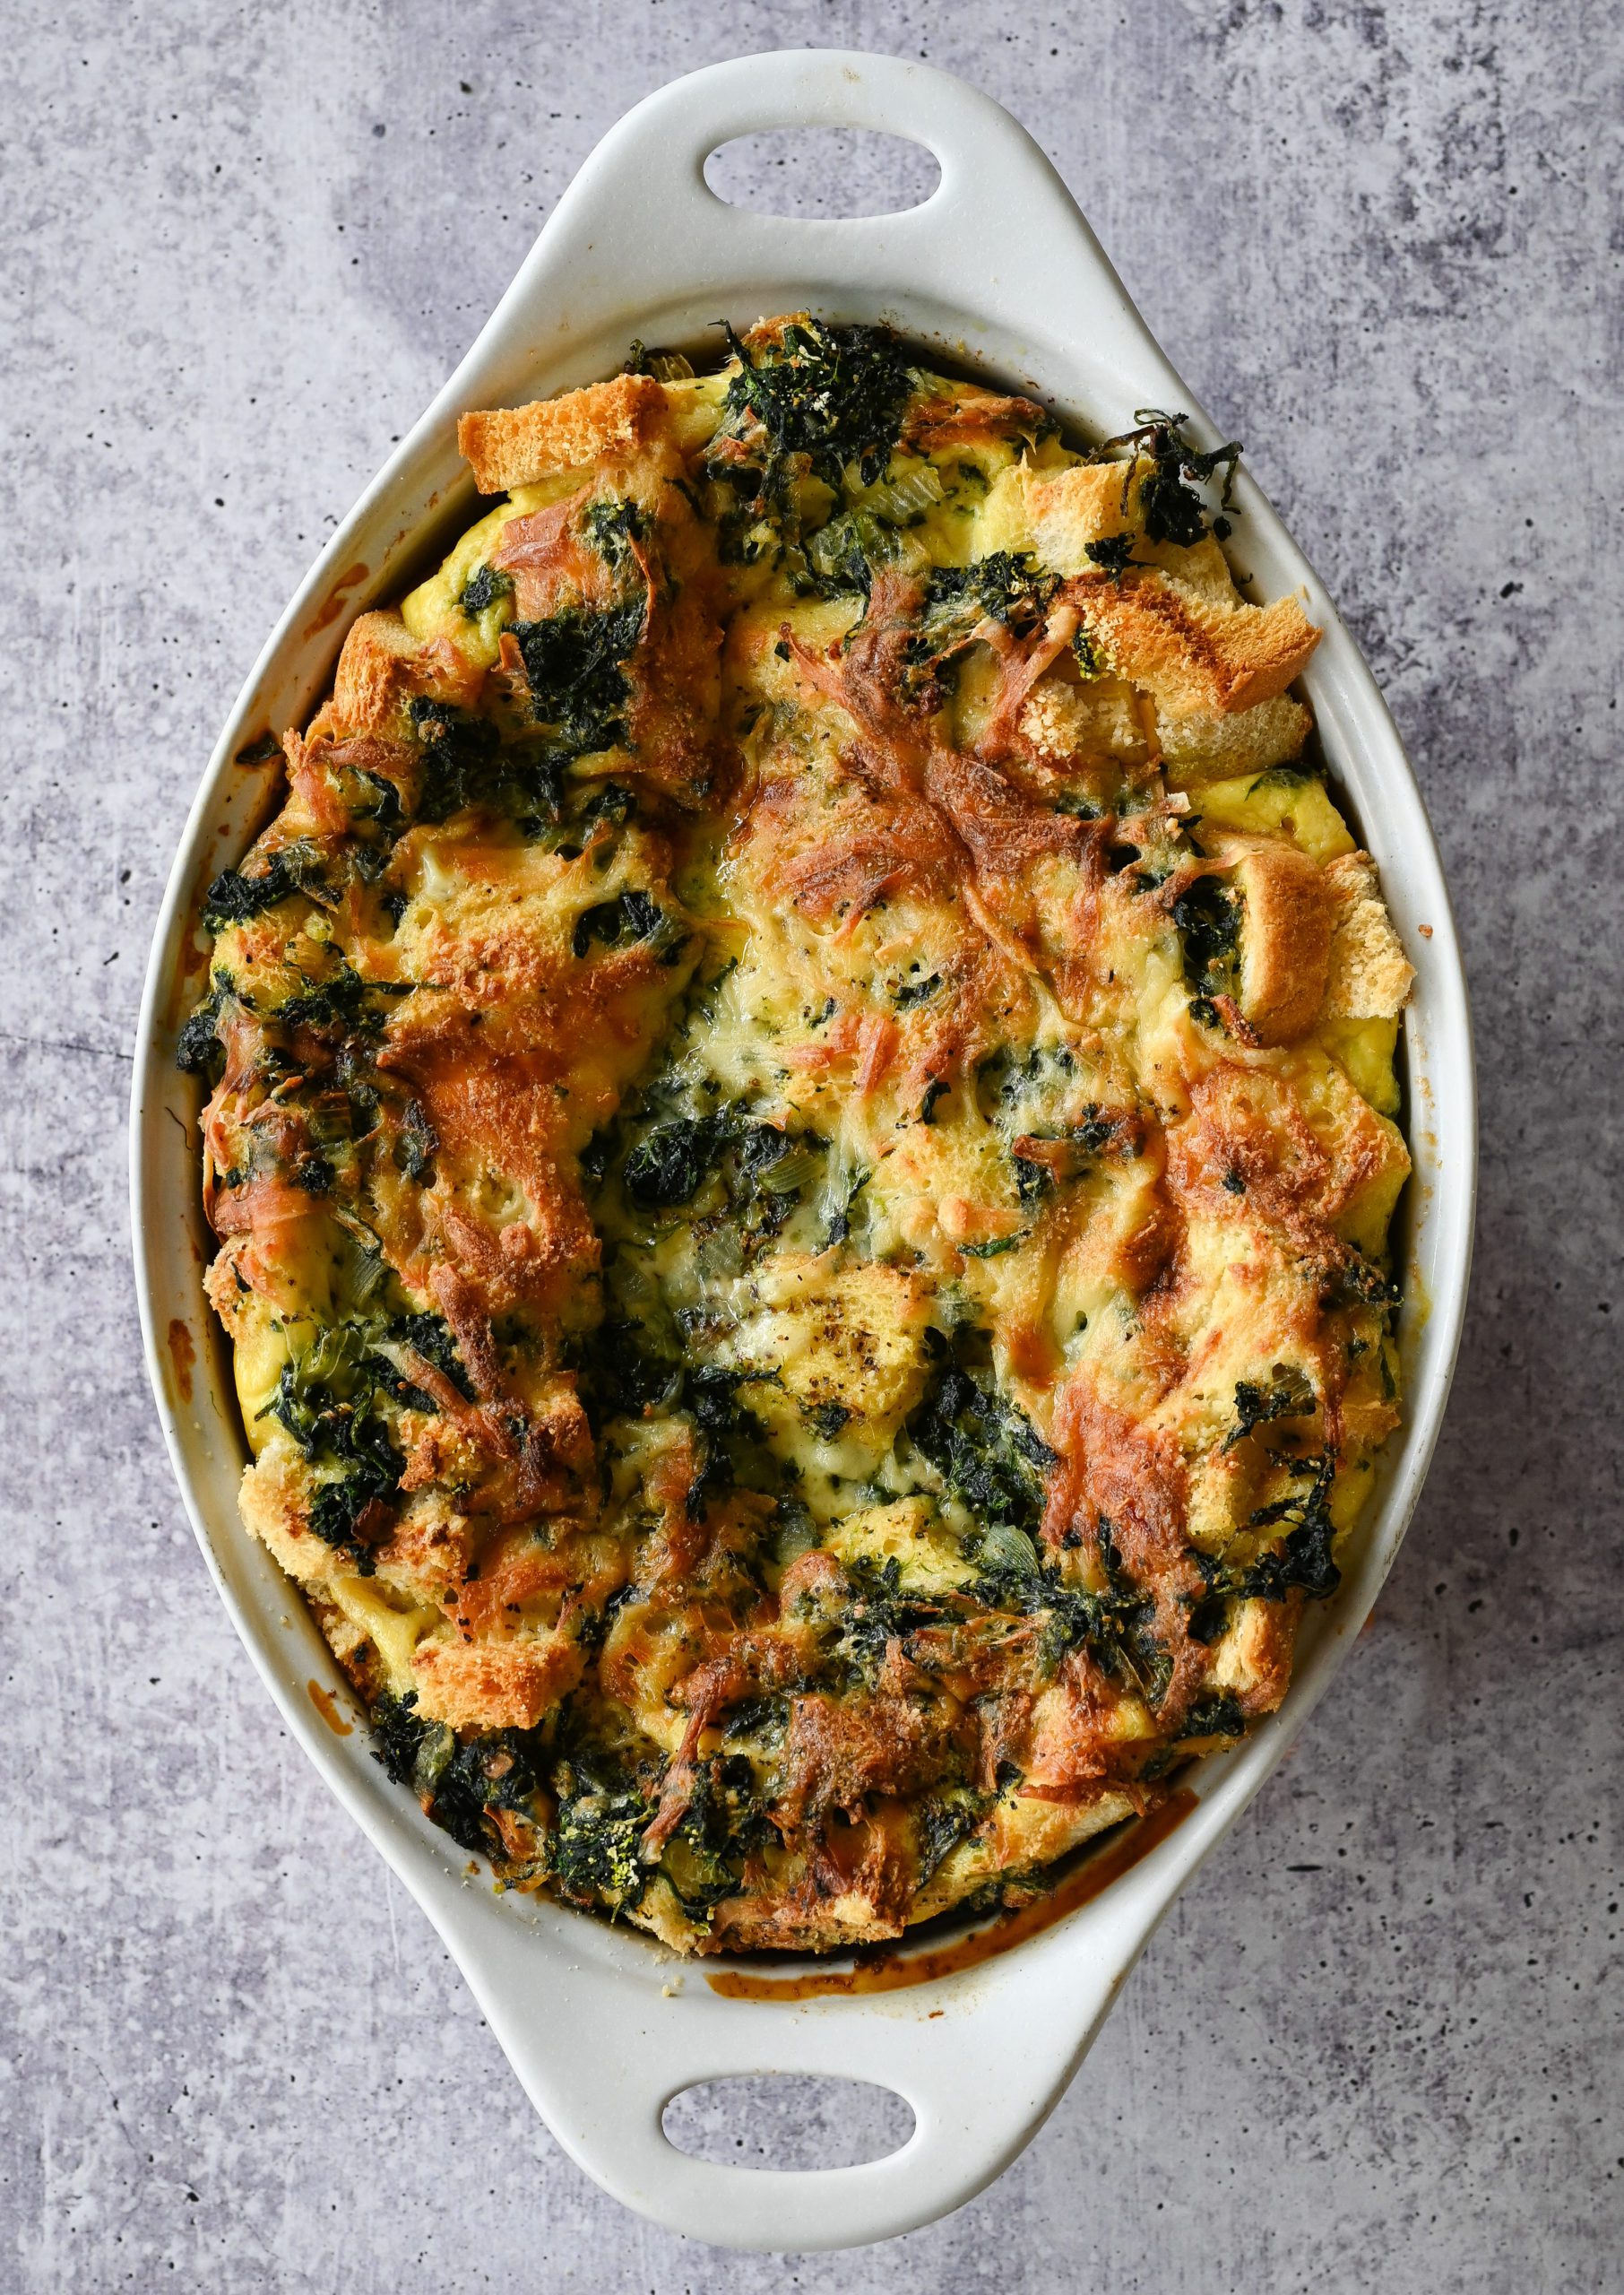 https://www.onceuponachef.com/images/2015/03/strata-spinach-cheese-scaled.jpg